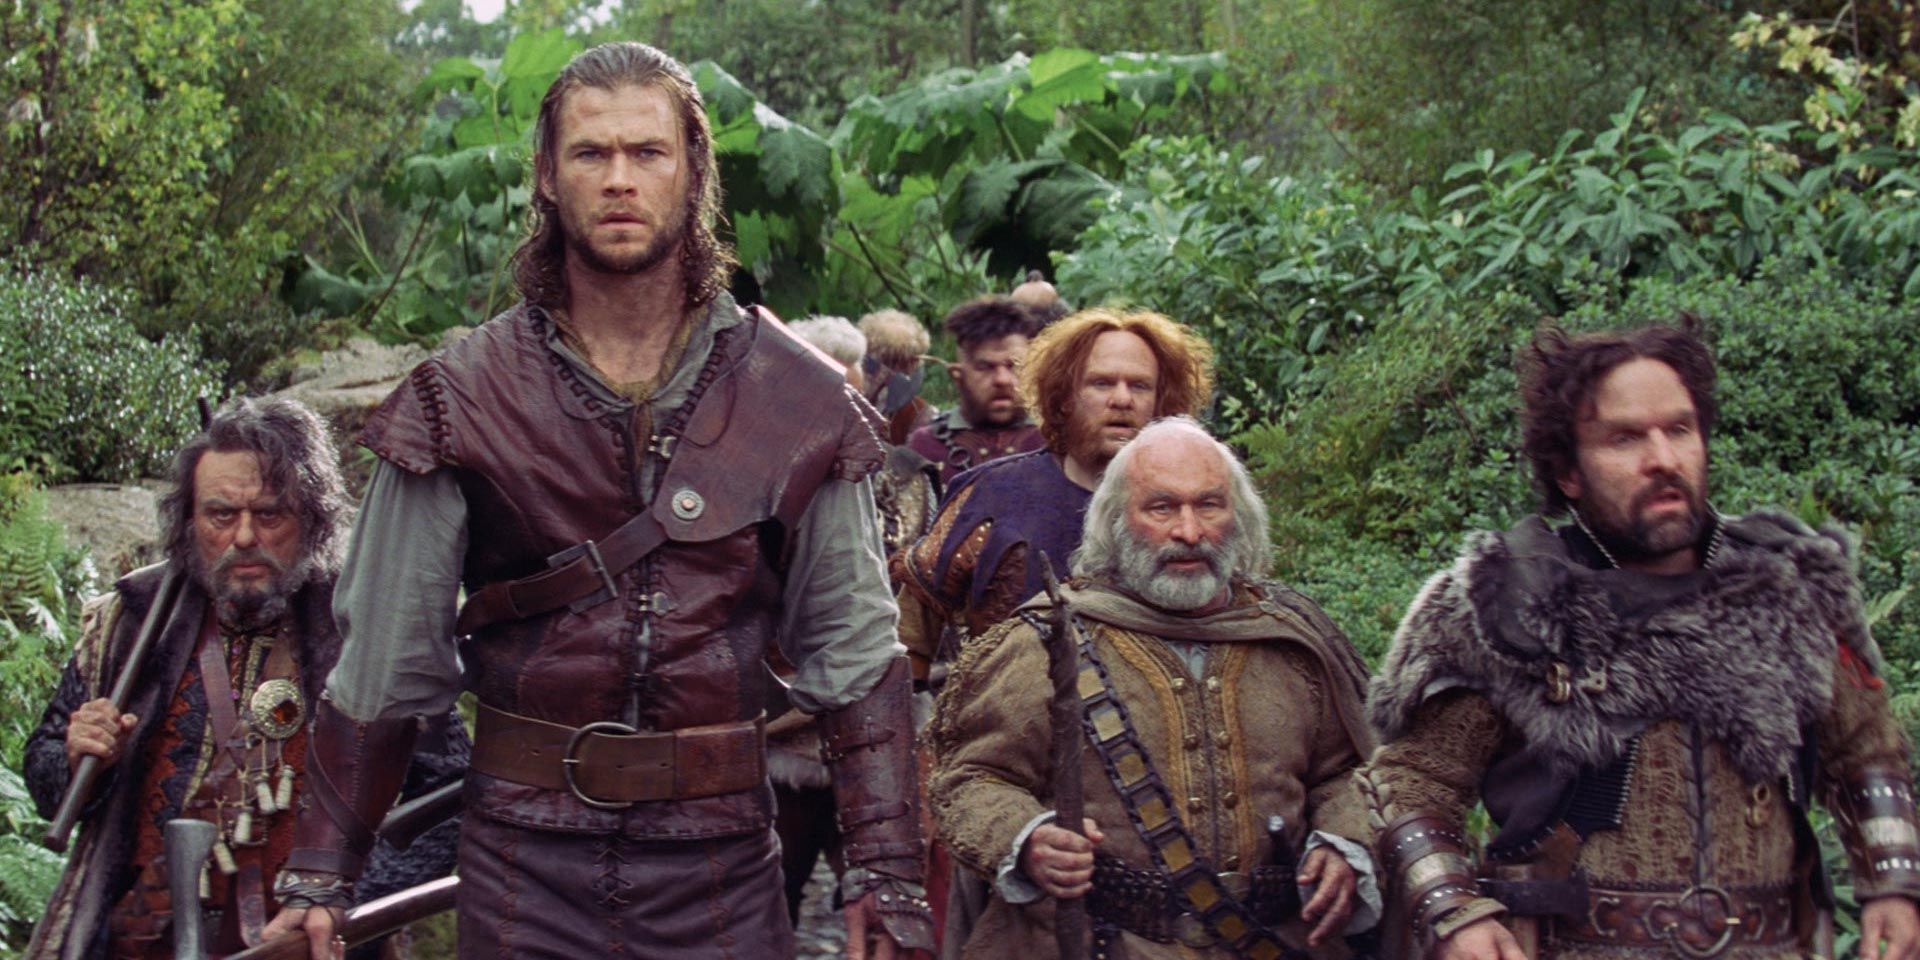 The Huntsman and Dwarves Snow White 